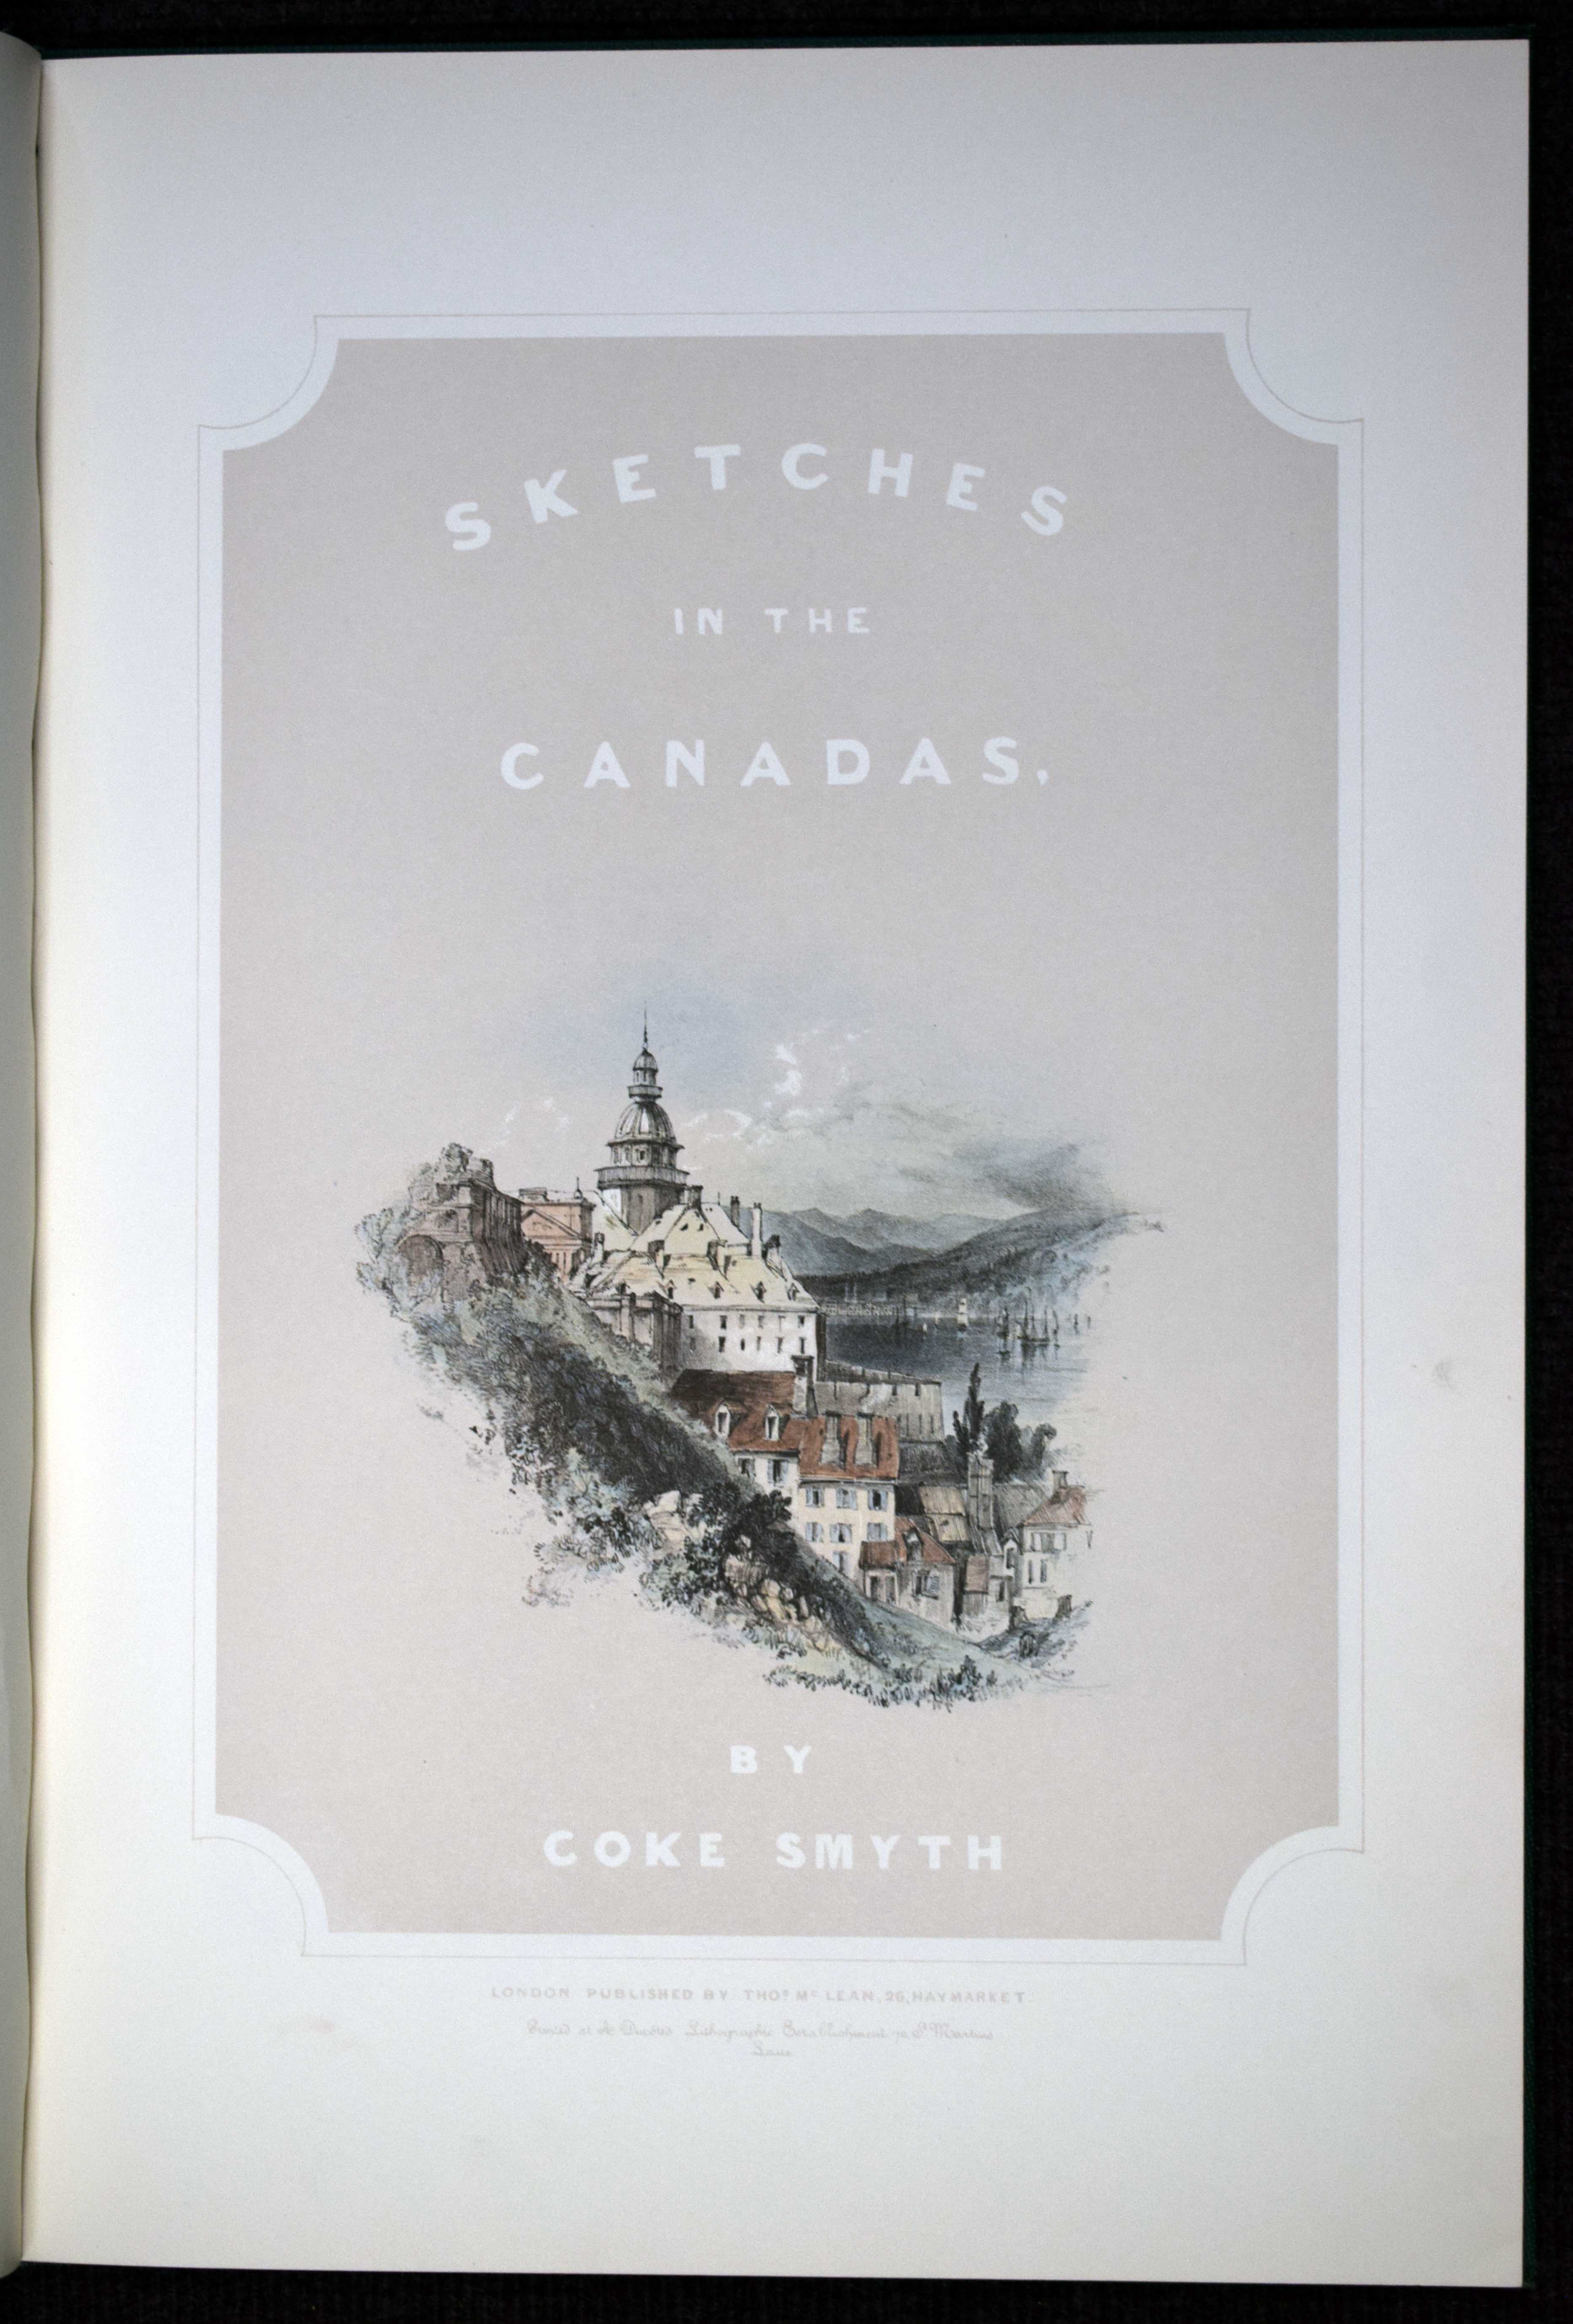 Sketches in the Canadas